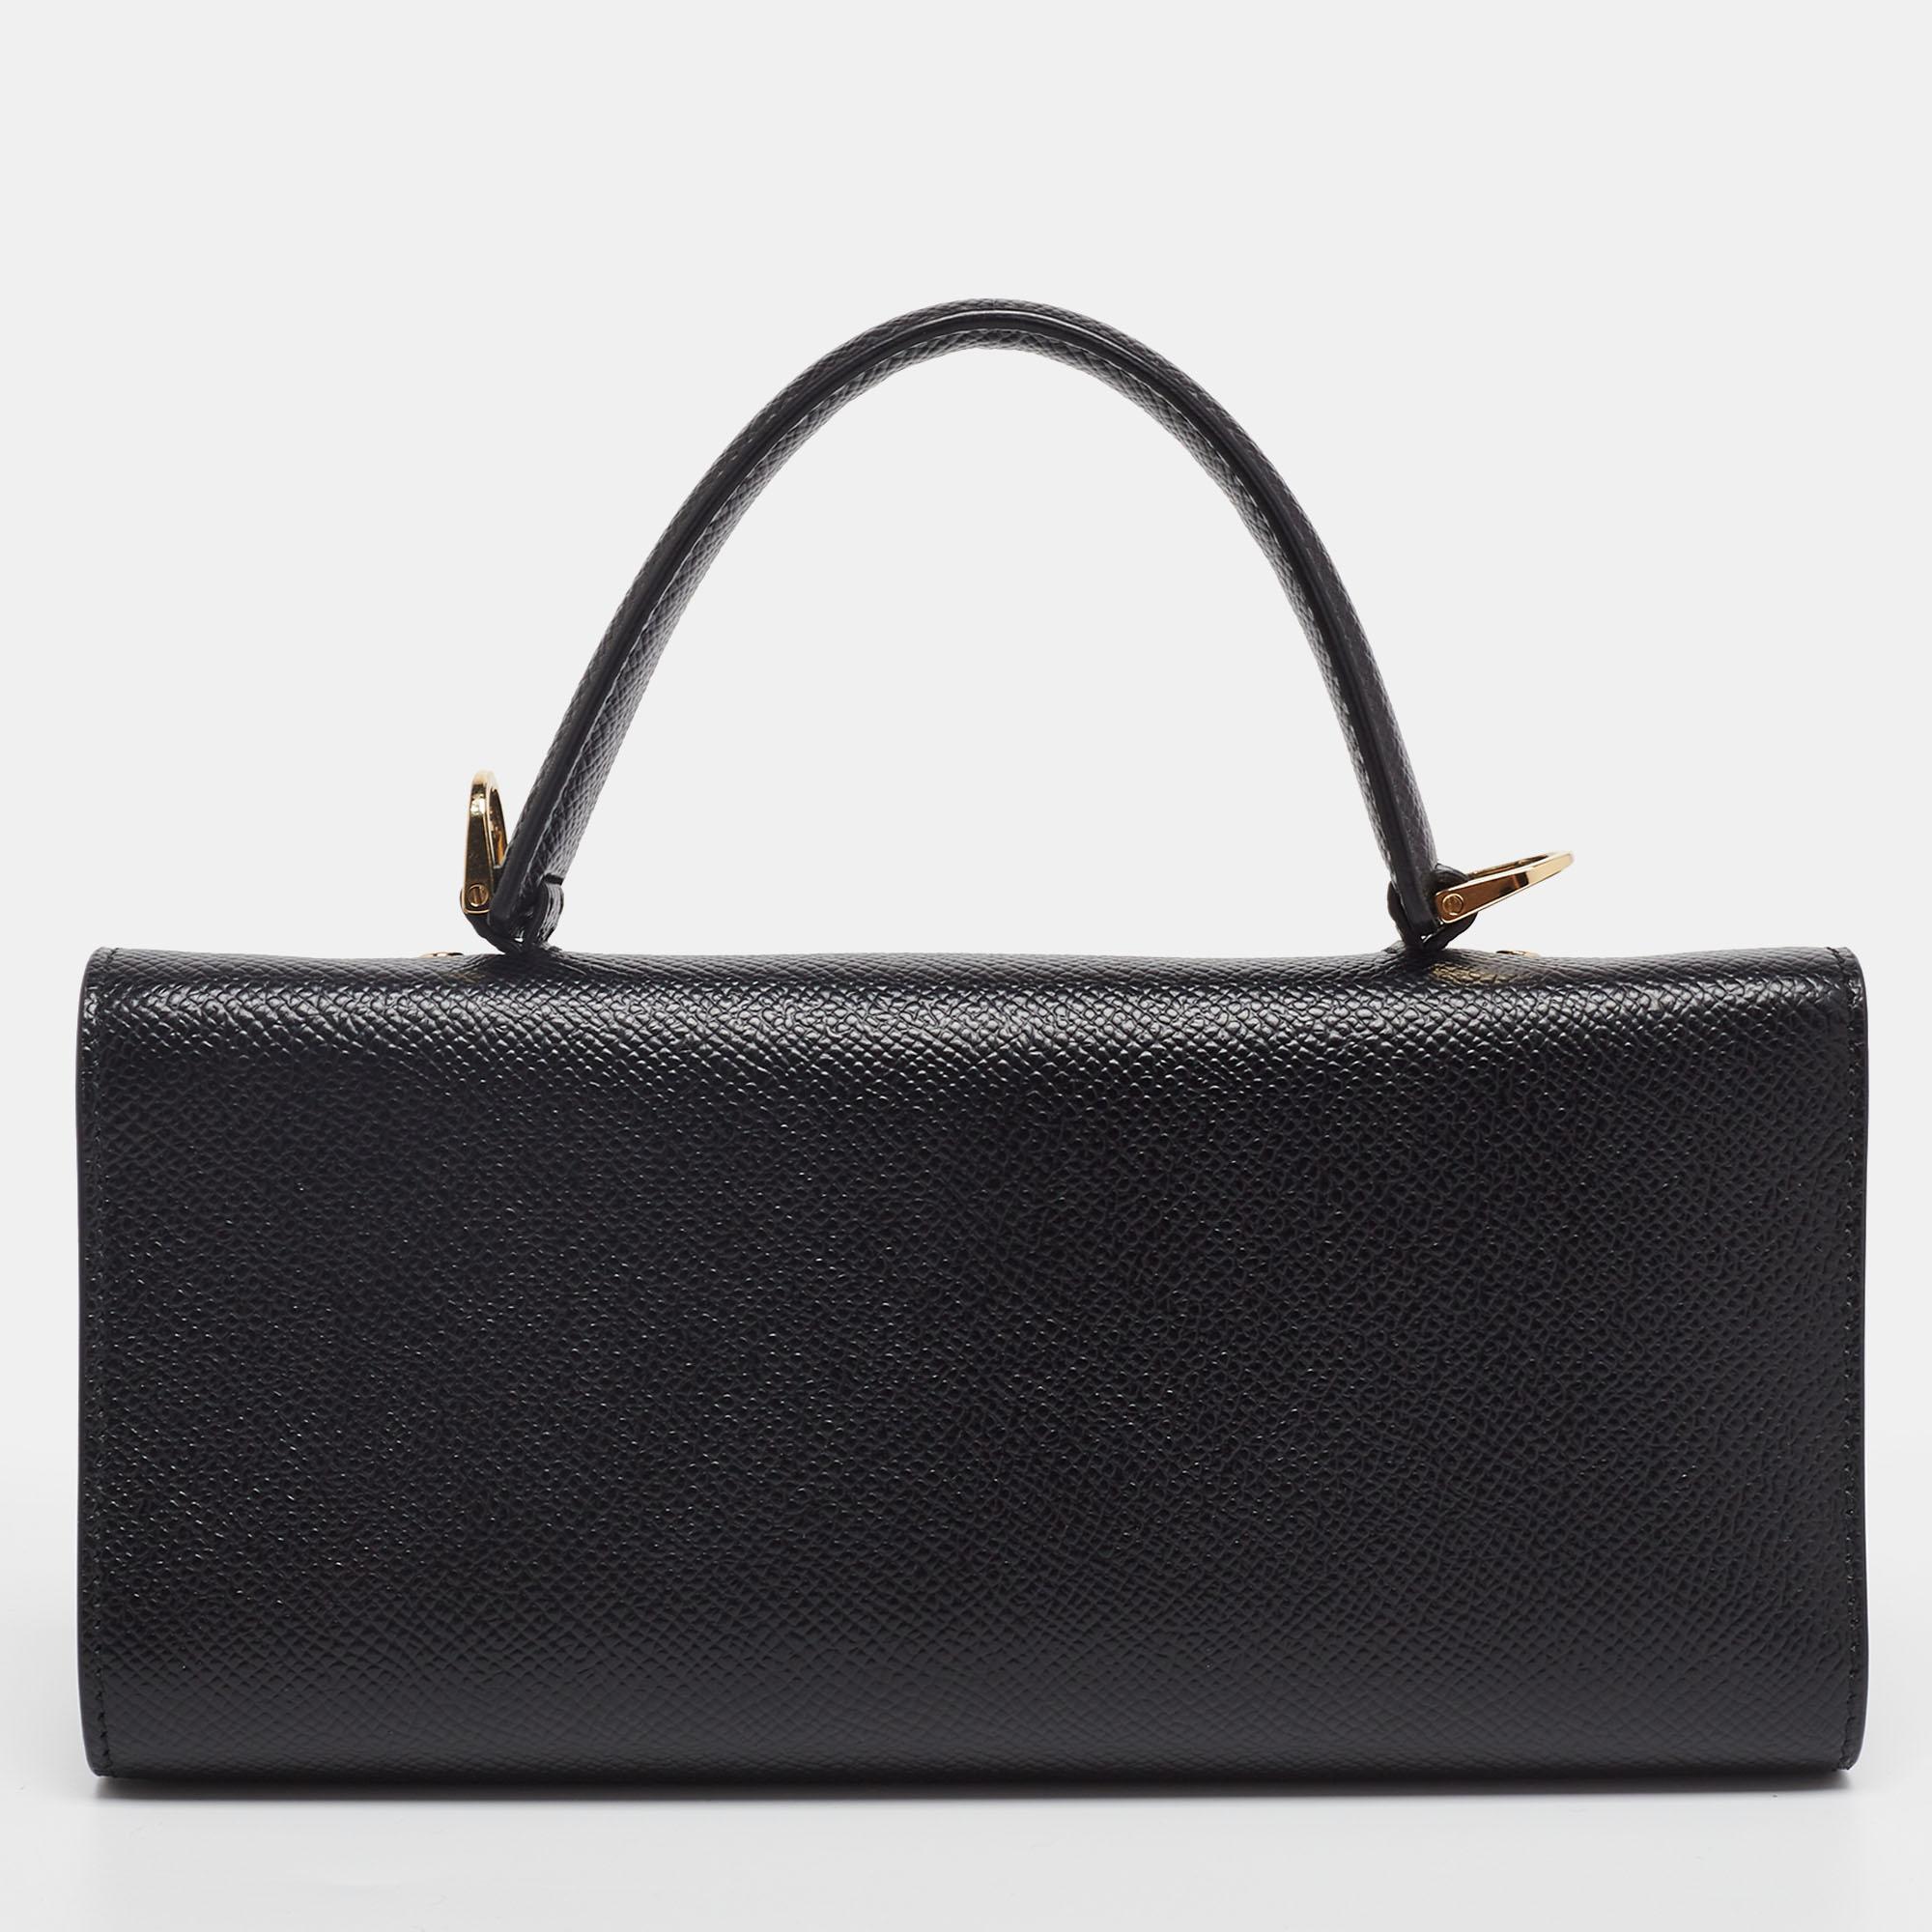 This Salvatore Ferragamo clutch bag is crafted from black leather and is highlighted by the Vara bow on the front. It has a top handle and a shoulder strap with a flap closure that opens to a well-sized interior. A truly perfect evening accessory to